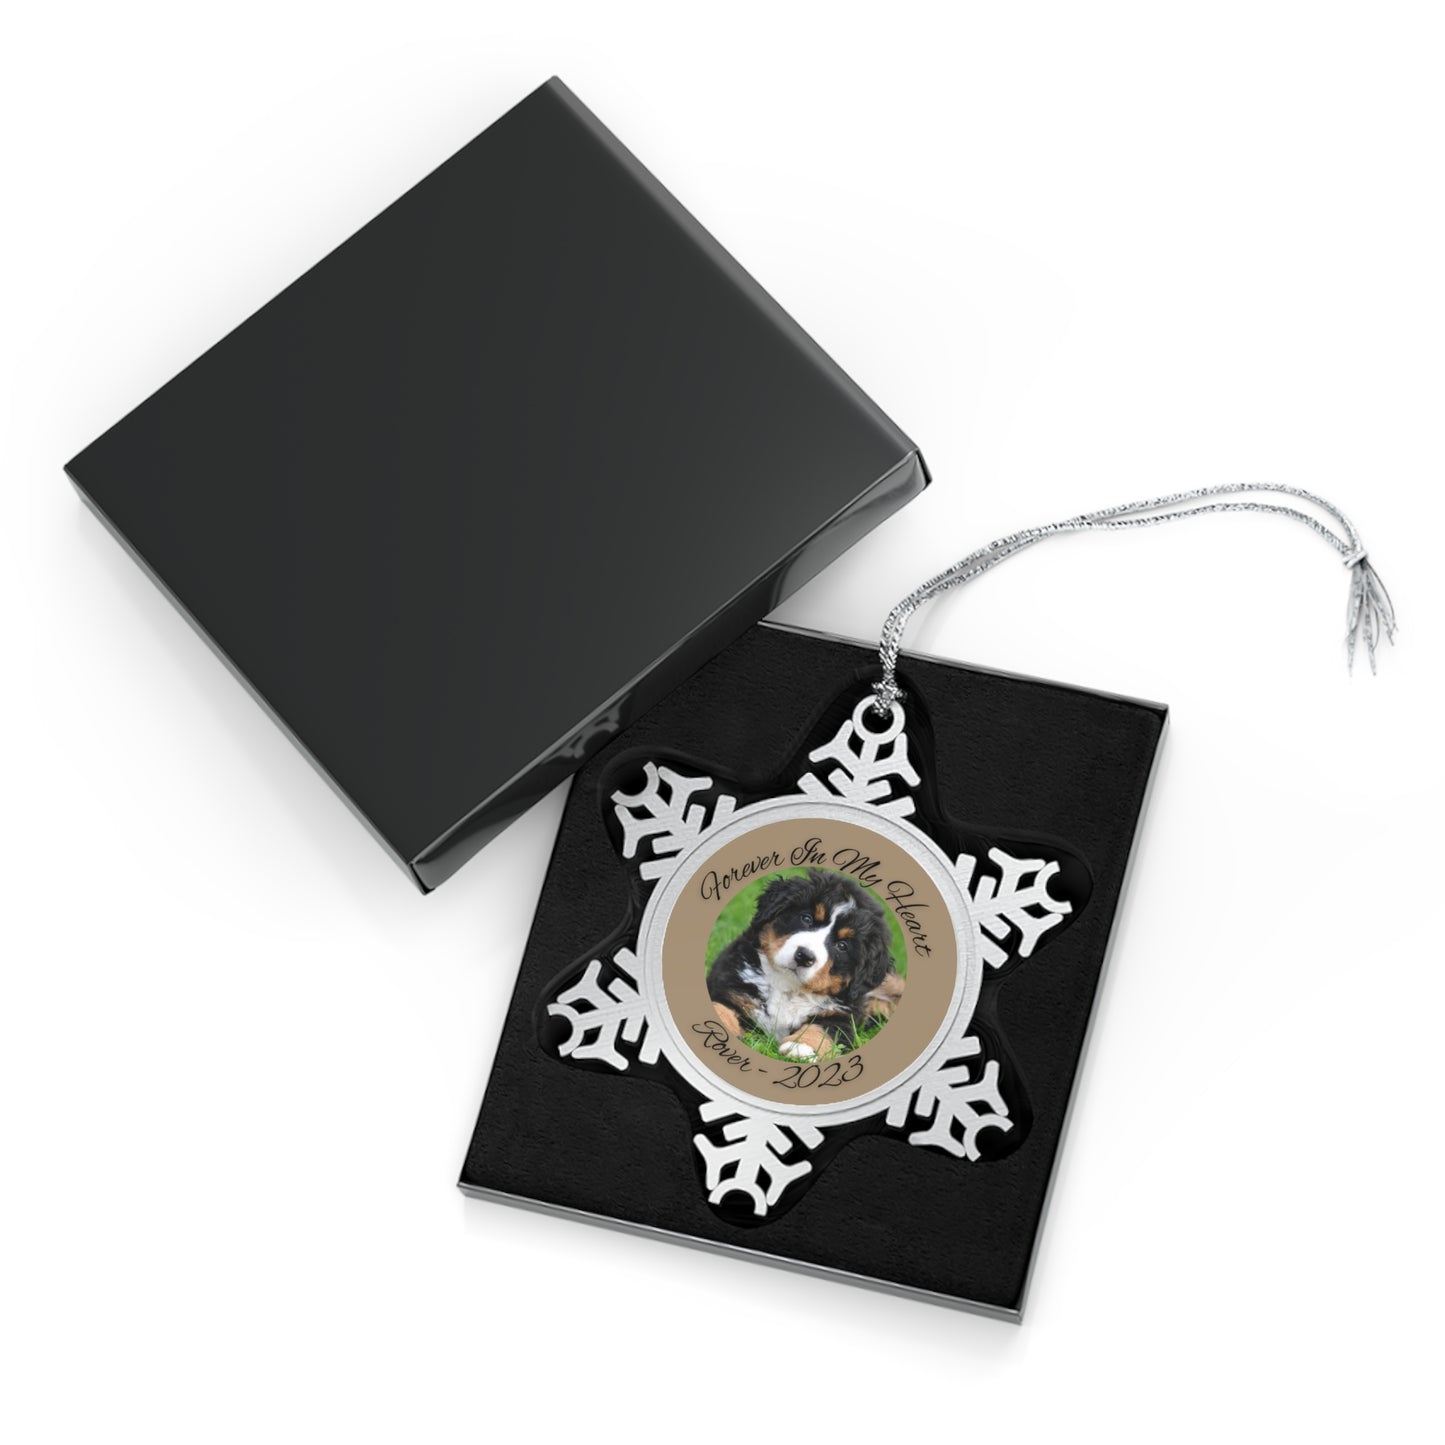 Pet Picture Frame Memorial Ornament - Pewter Snowflake Ornament - Pet's Memorial Ornament, Customized Pet Ornament With Name & Year